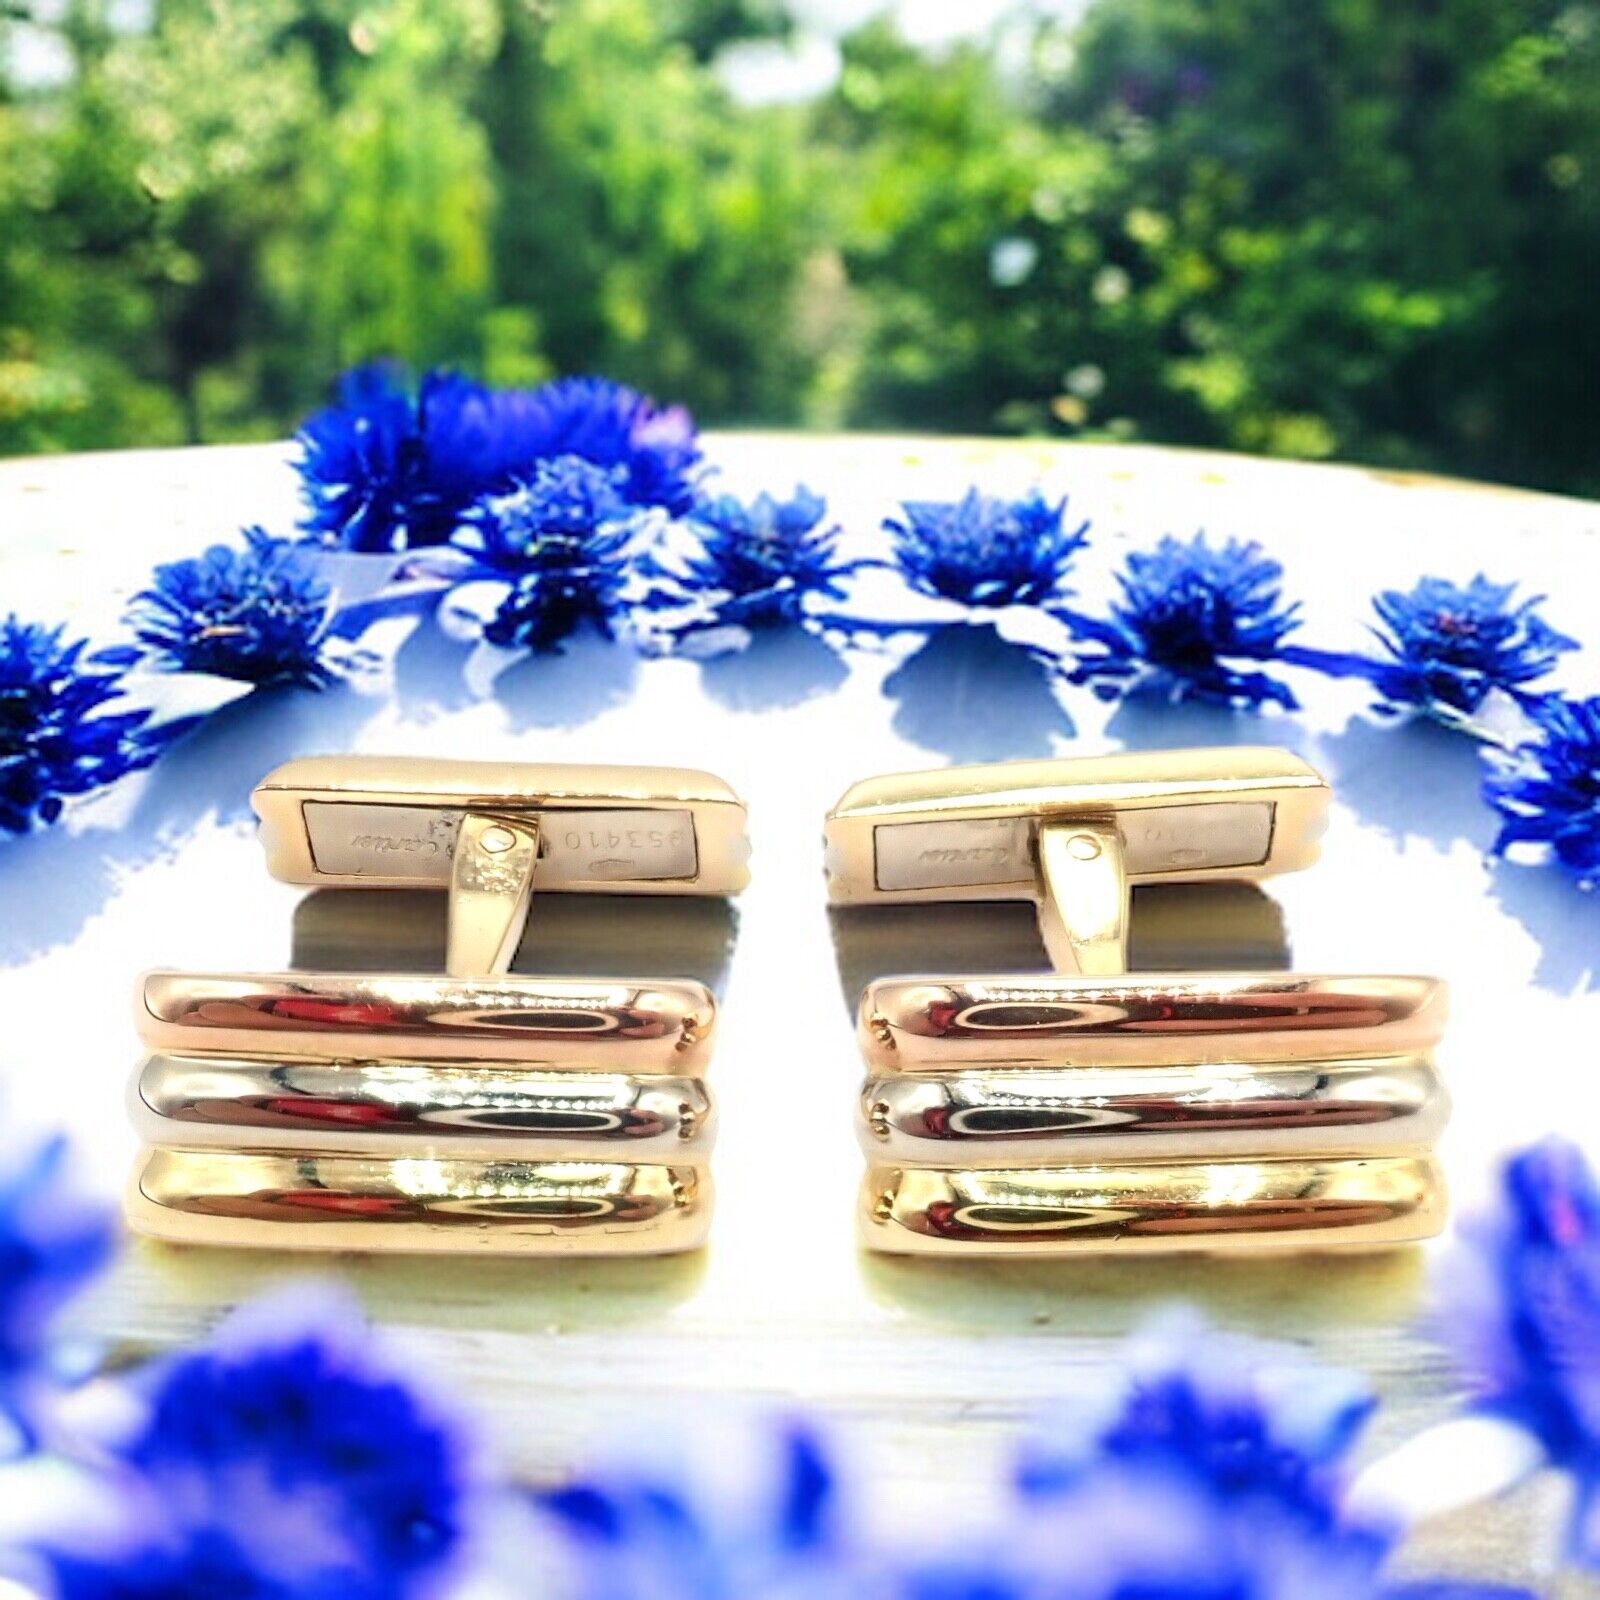 Cartier Jewelry & Watches:Men's Jewelry:Cufflinks Rare! Vintage Authentic Cartier Trinity 18k Tri-Color Gold Cufflinks